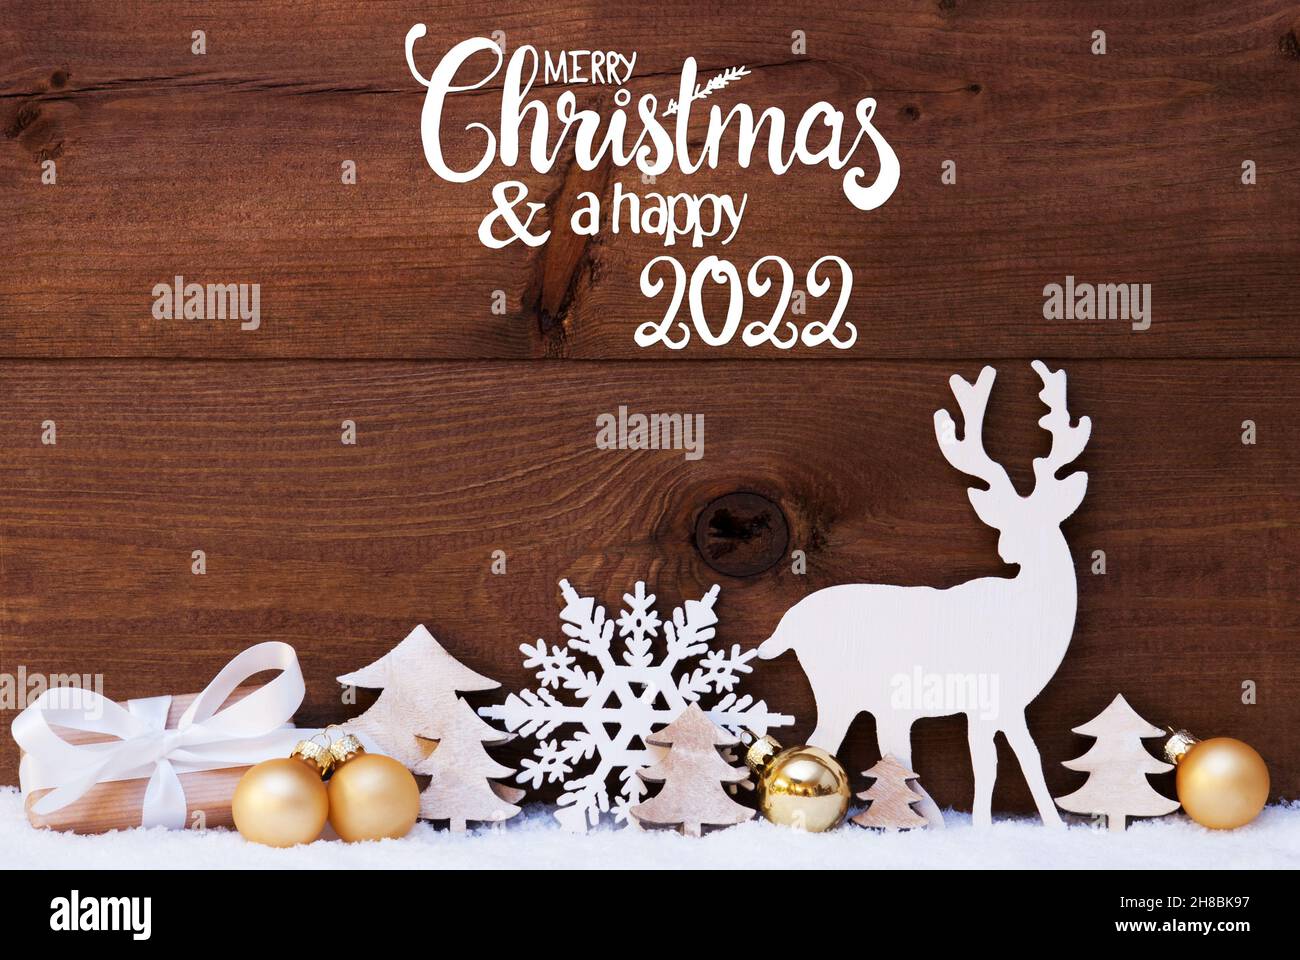 Reindeer, Gift, Tree, Golden Ball, Snow, Merry Christmas And A Happy 2022 Stock Photo